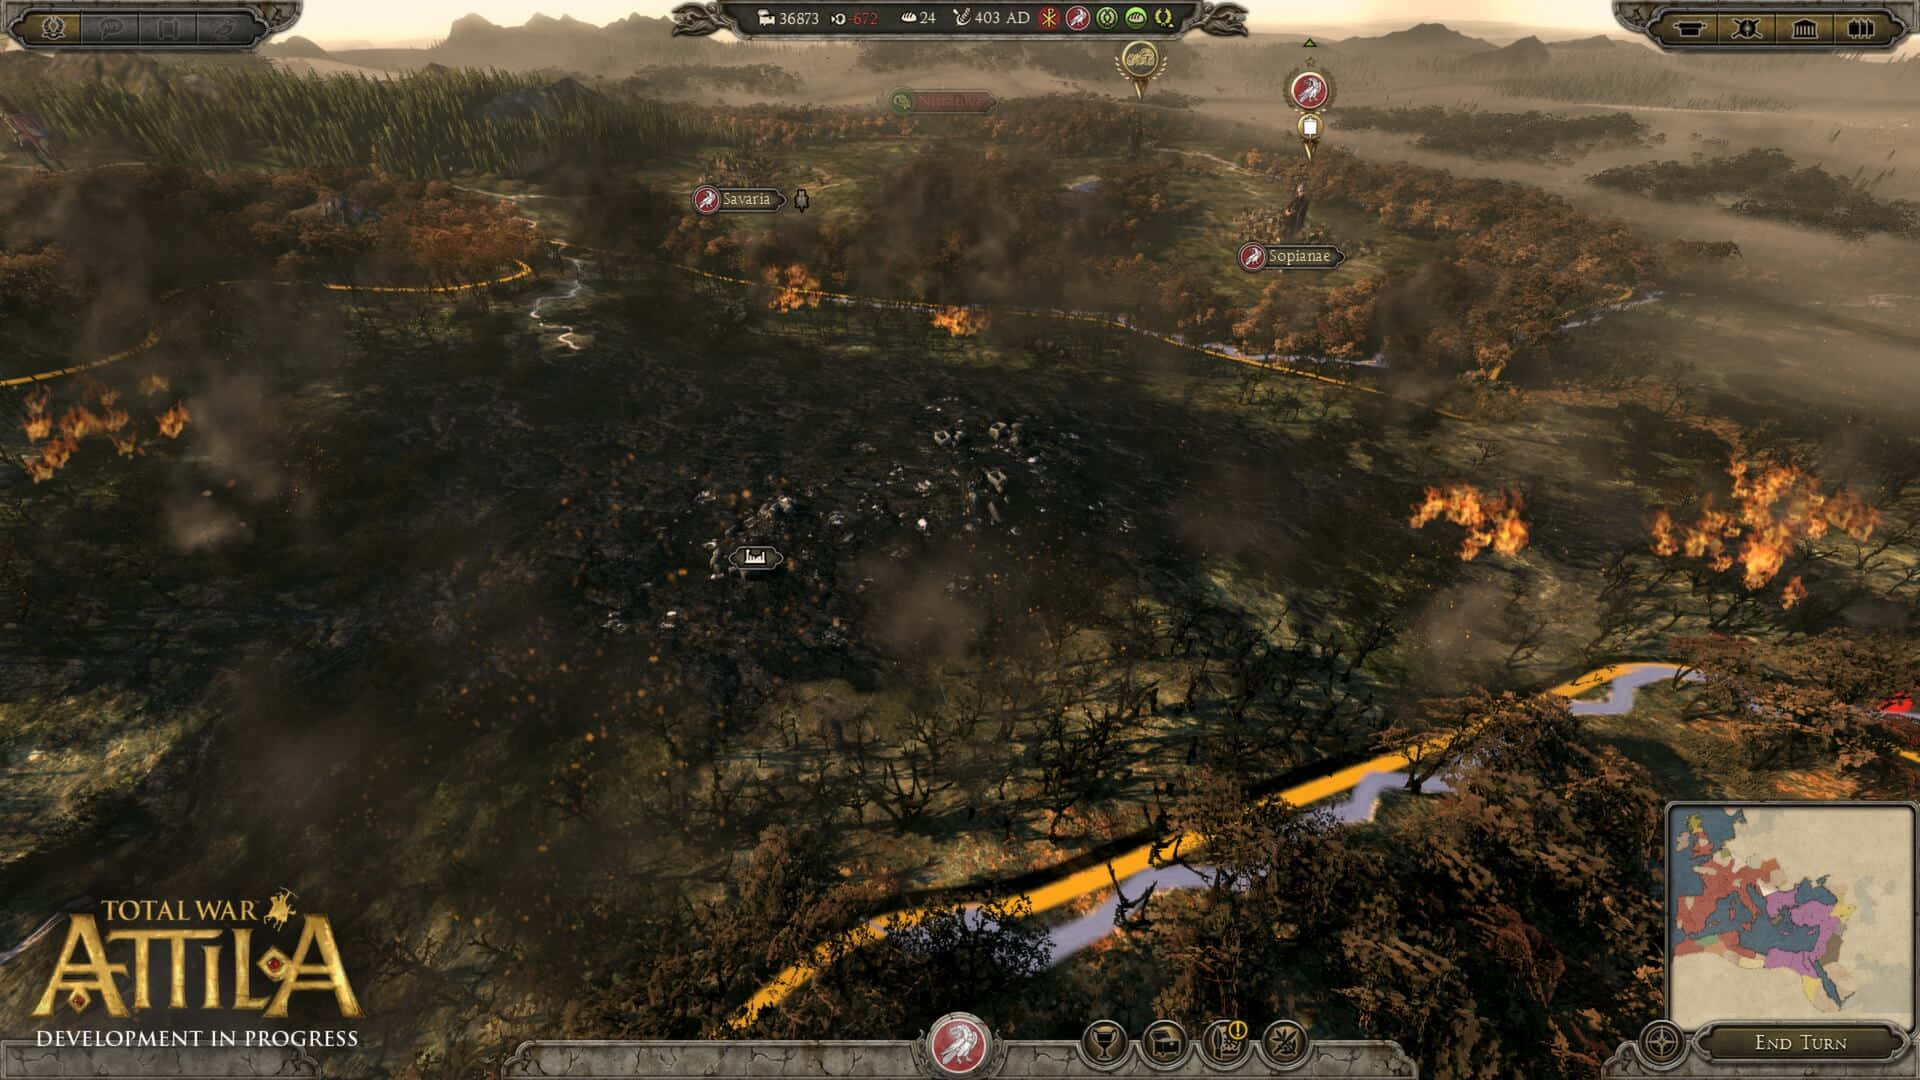 Total War Attila - Taking Strategy Games To The Next Level